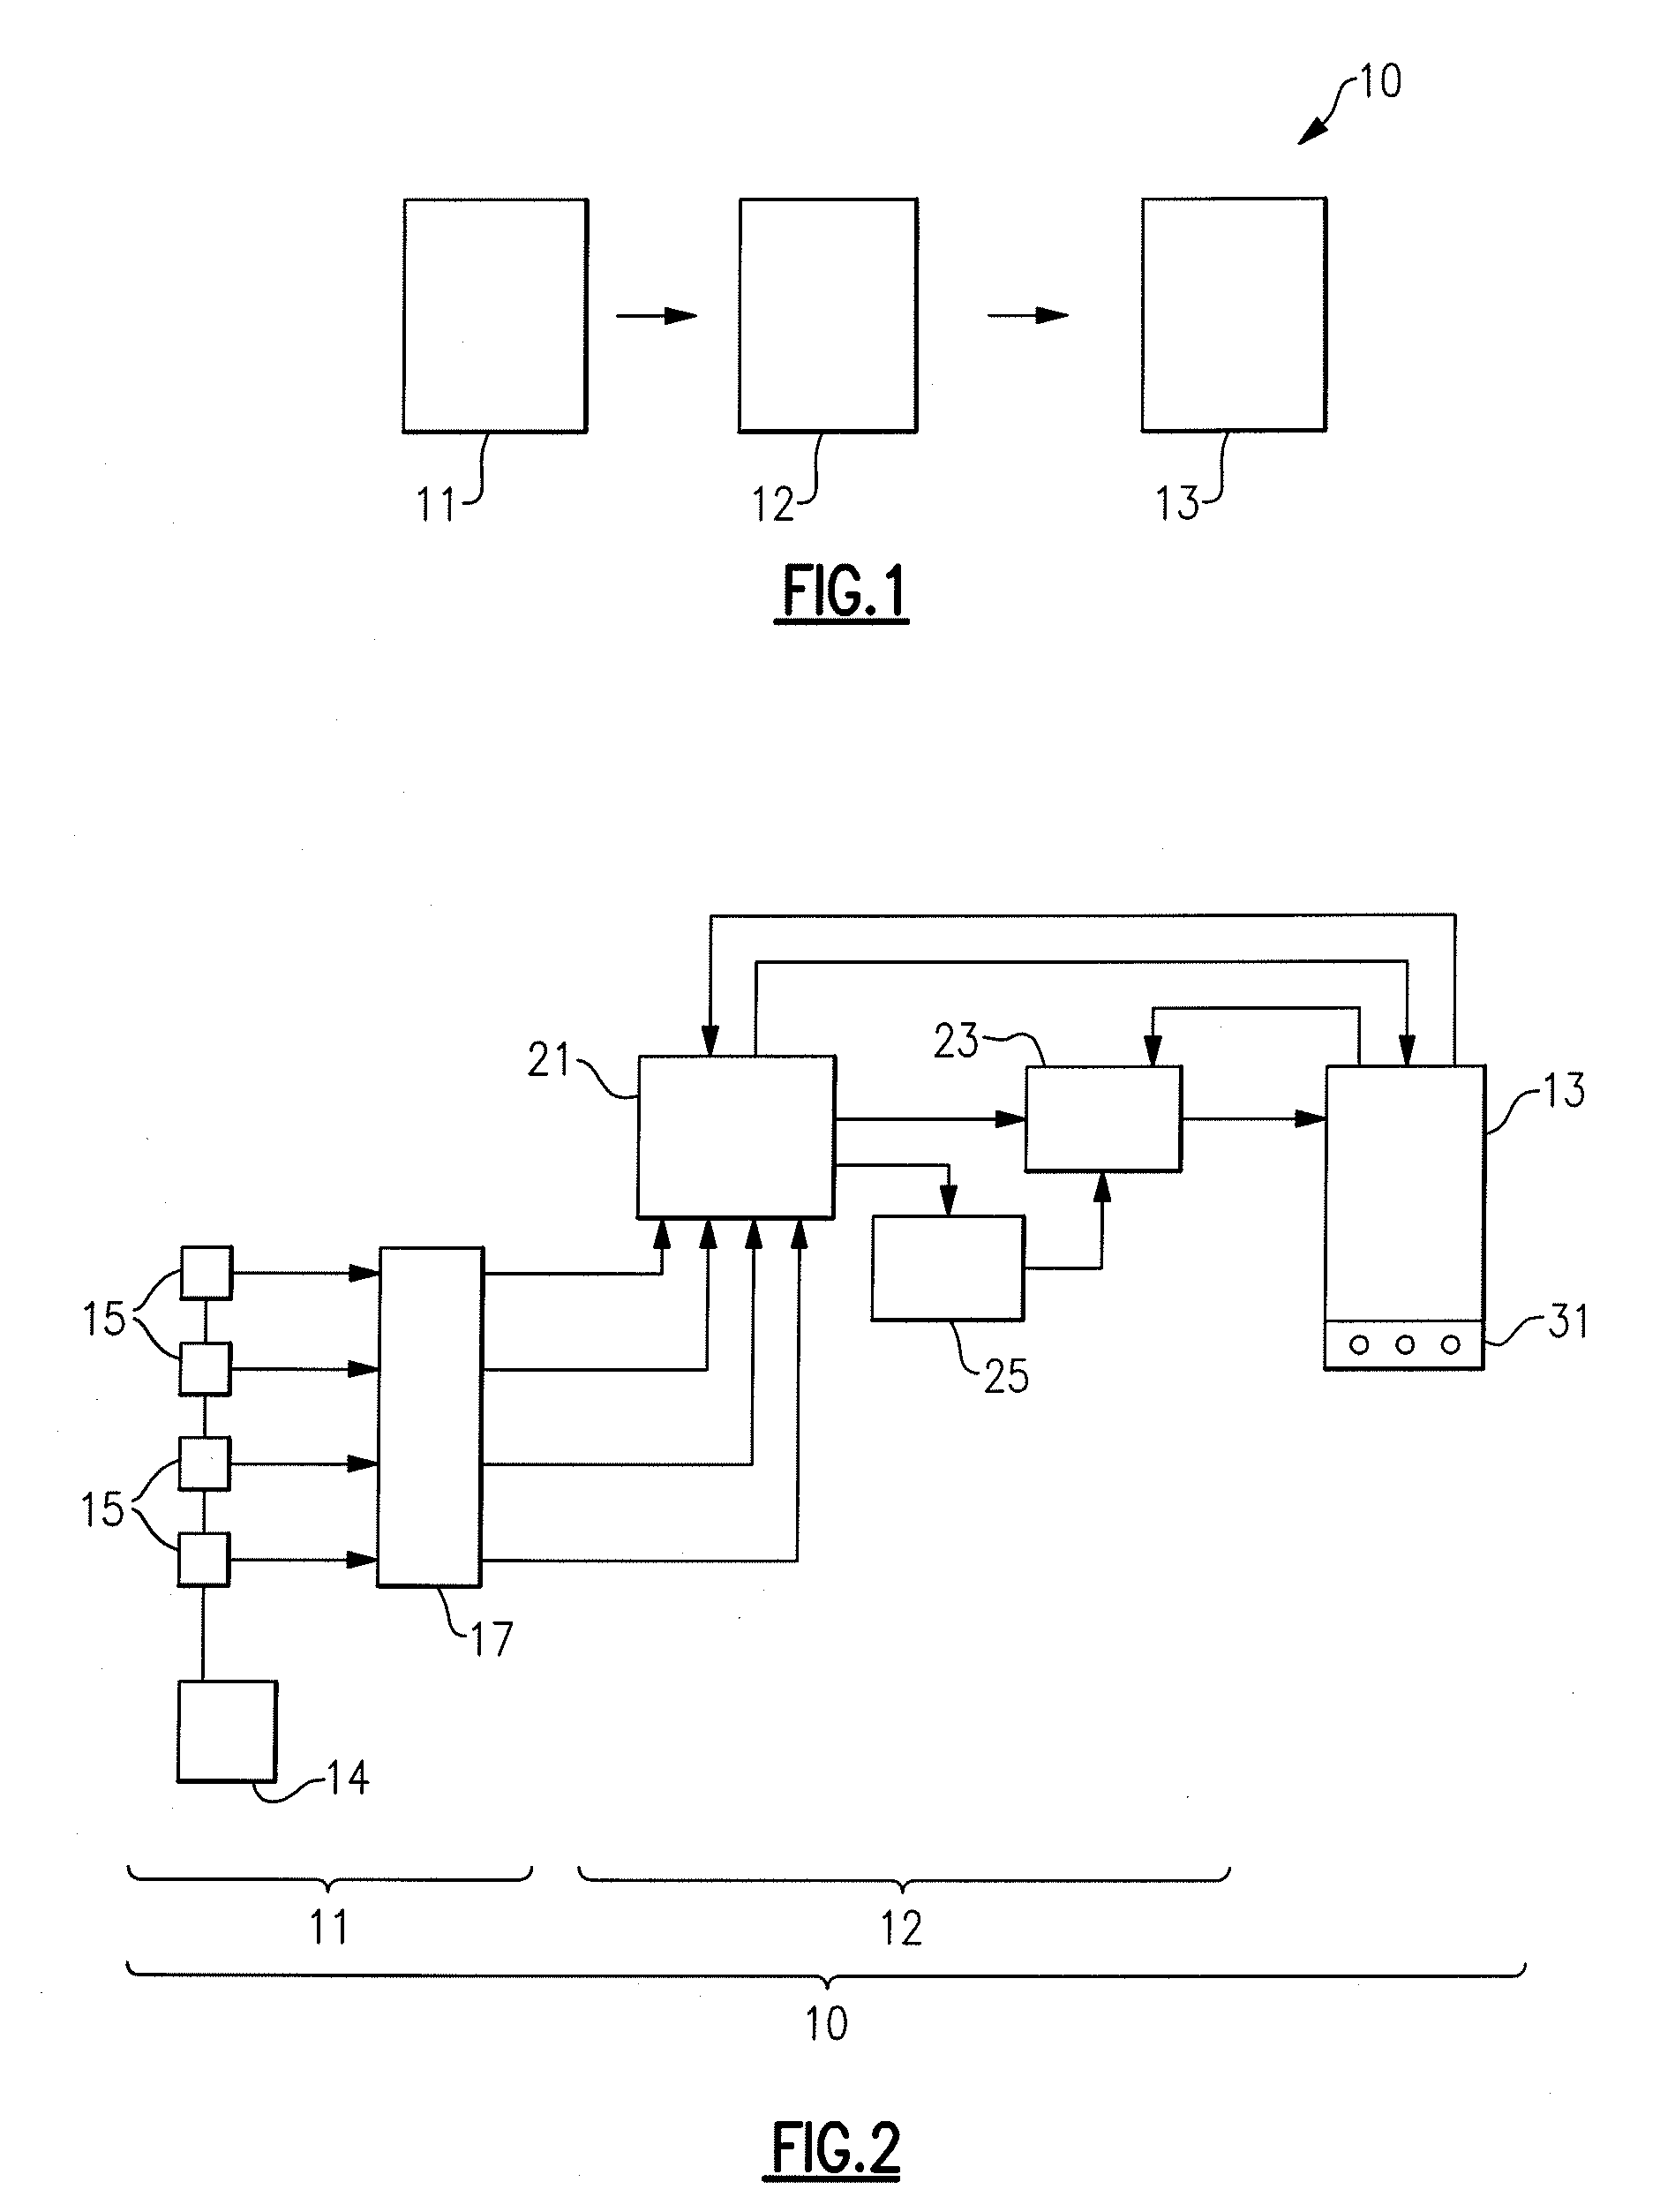 System for monitoring quality of water system